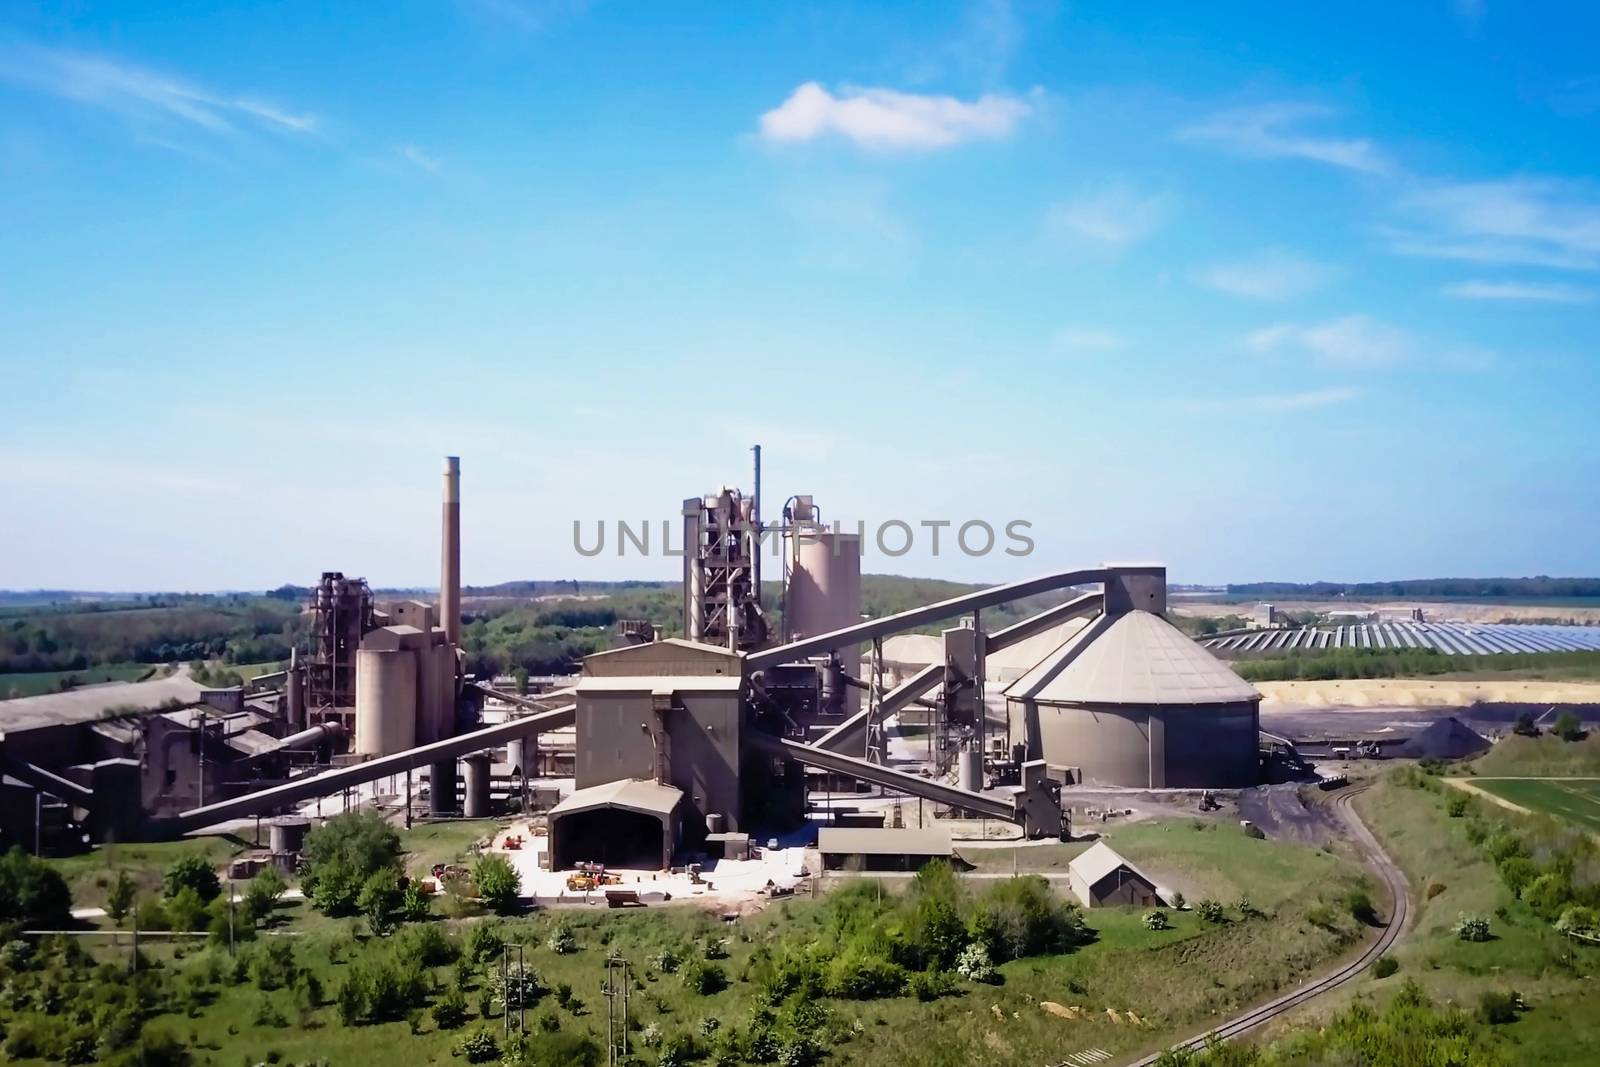 Large cement plant. The production of cement on an industrial scale in the factory.